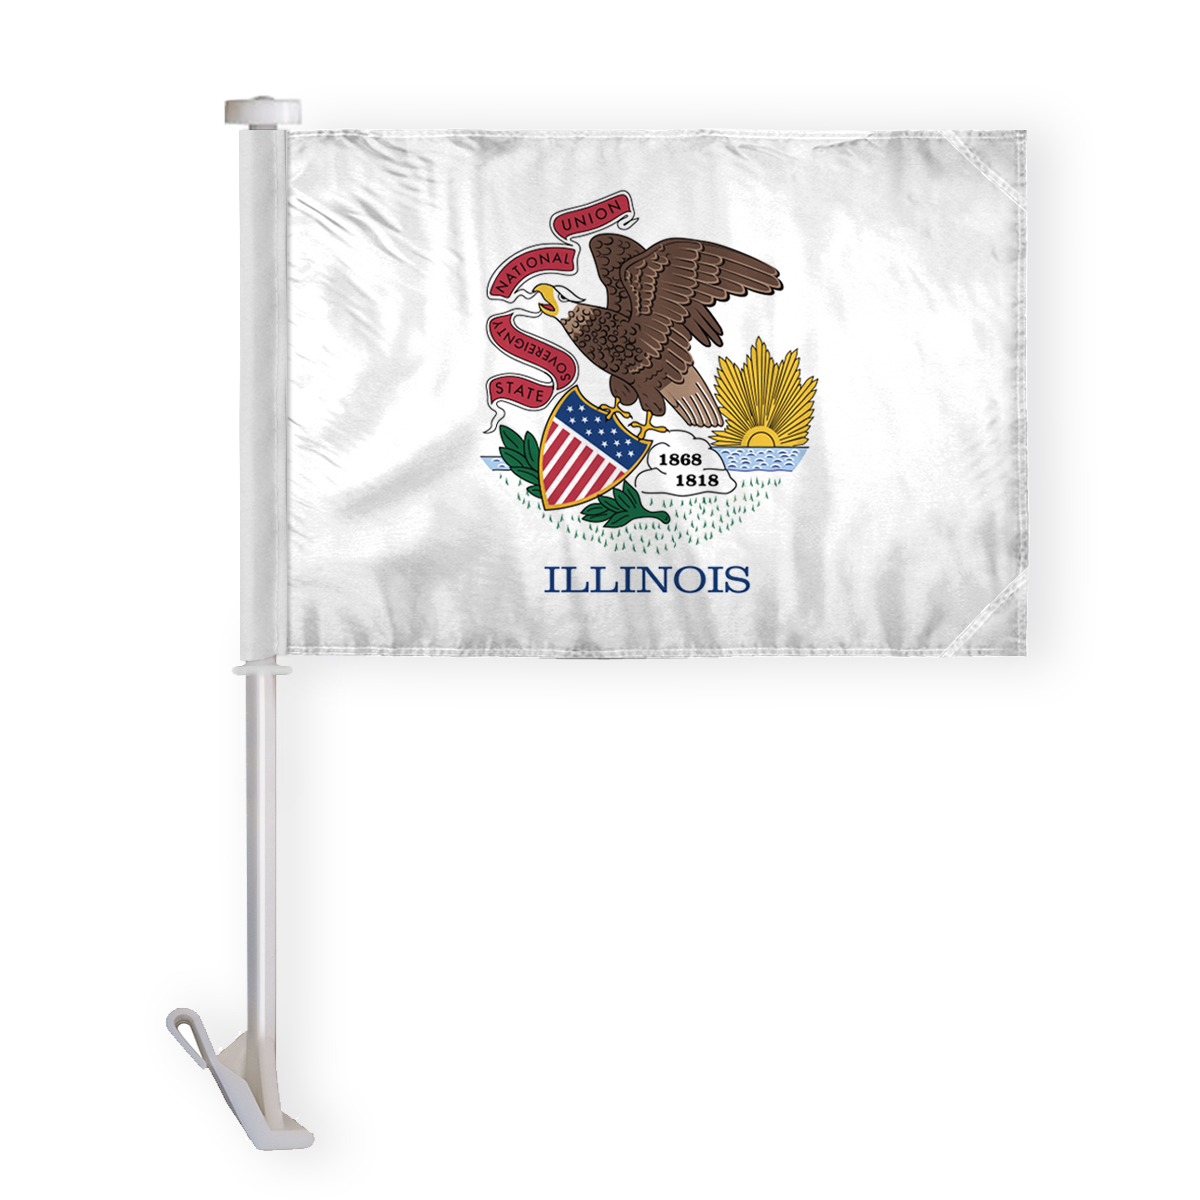 AGAS Illinois State Car Window Flag 10.5x15 inch - Double Side Printed Knitted Polyester